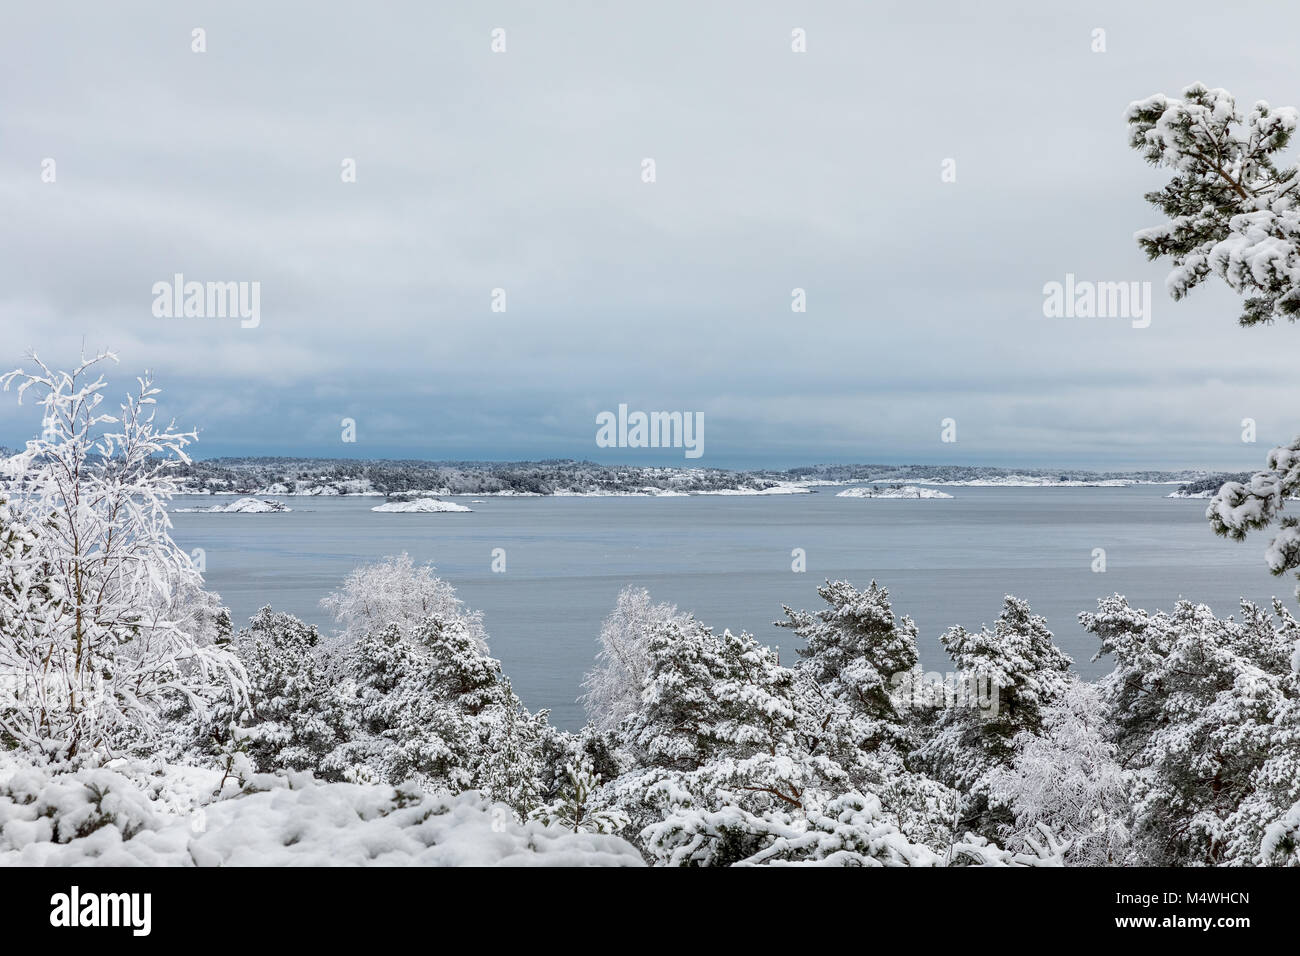 Beautiful winter day at Odderoya in Kristiansand, Norway. Pine trees covered in snow. The ocean and archipelago in the background. Stock Photo